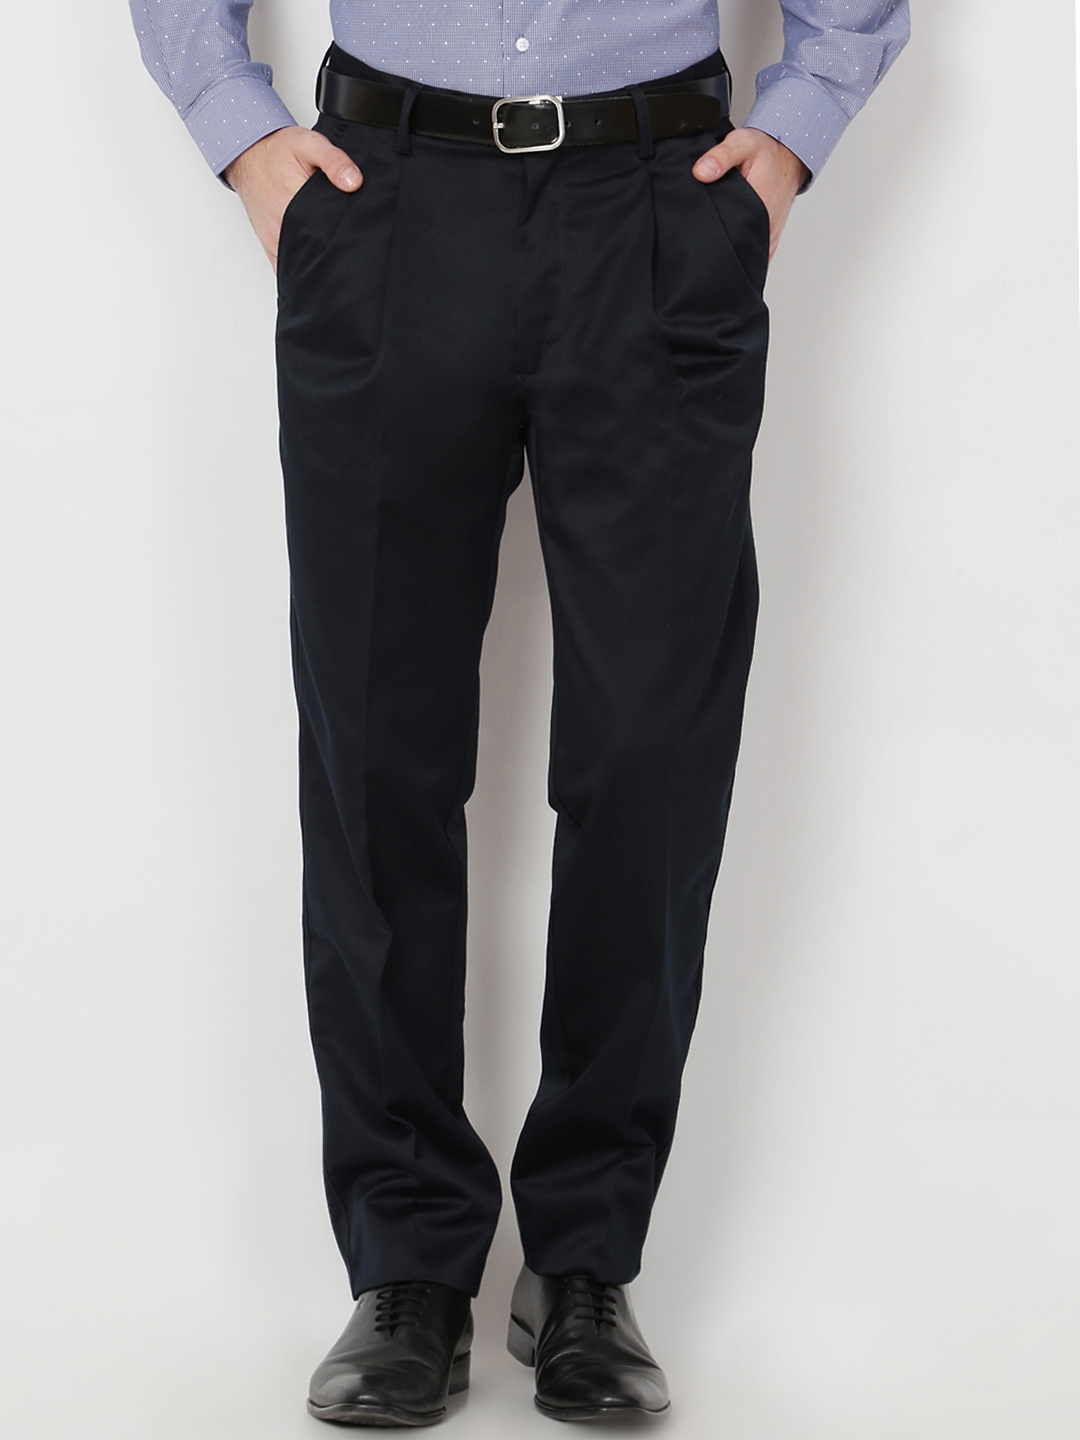 Buy Peter England Trousers online  Men  846 products  FASHIOLAin